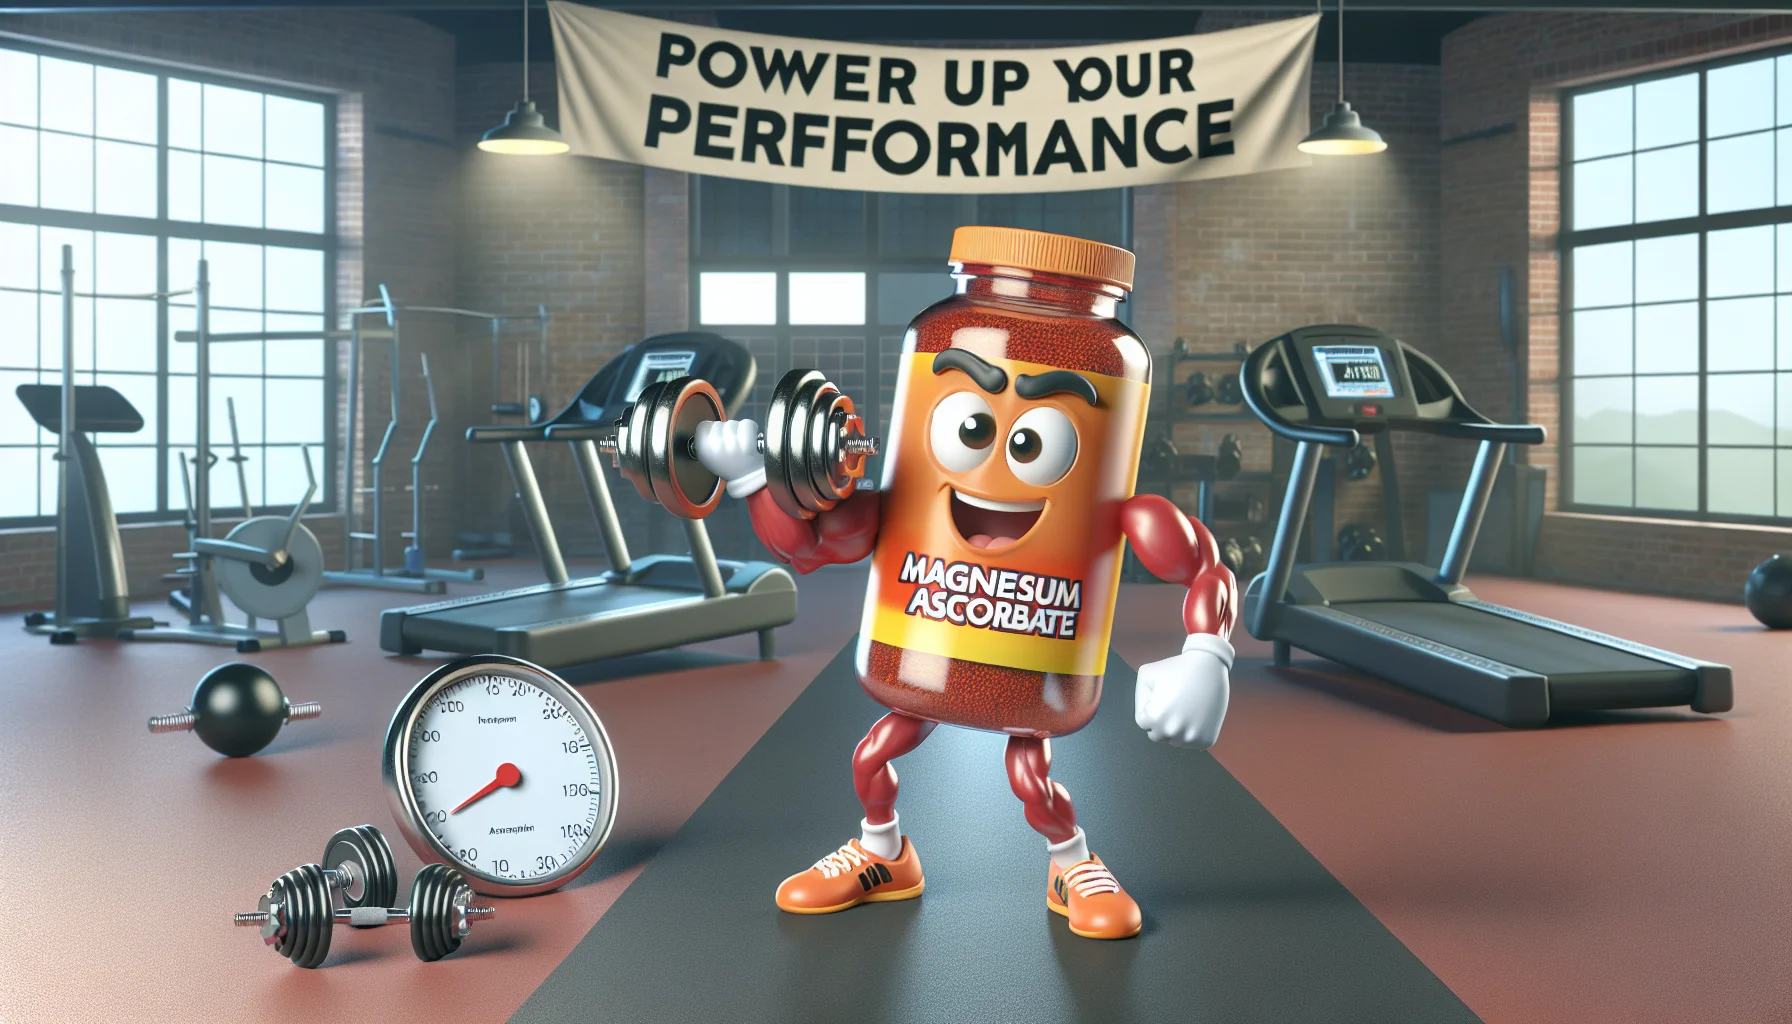 Create a humorous and engaging scene depicting magnesium ascorbate, styled as a lively character, being visibly vigorous in an athletic setting. The setting consists of a gym environment with various sports equipment like weights, treadmills, round timer in the backdrop. The character of magnesium ascorbate has a muscular physique, hinting its connections to sports supplements. In one hand, it's lifting a heavy dumbbell, and in the other, it's holding a banner that says 'Power Up Your Performance' enticing people to consider using supplements for sports.